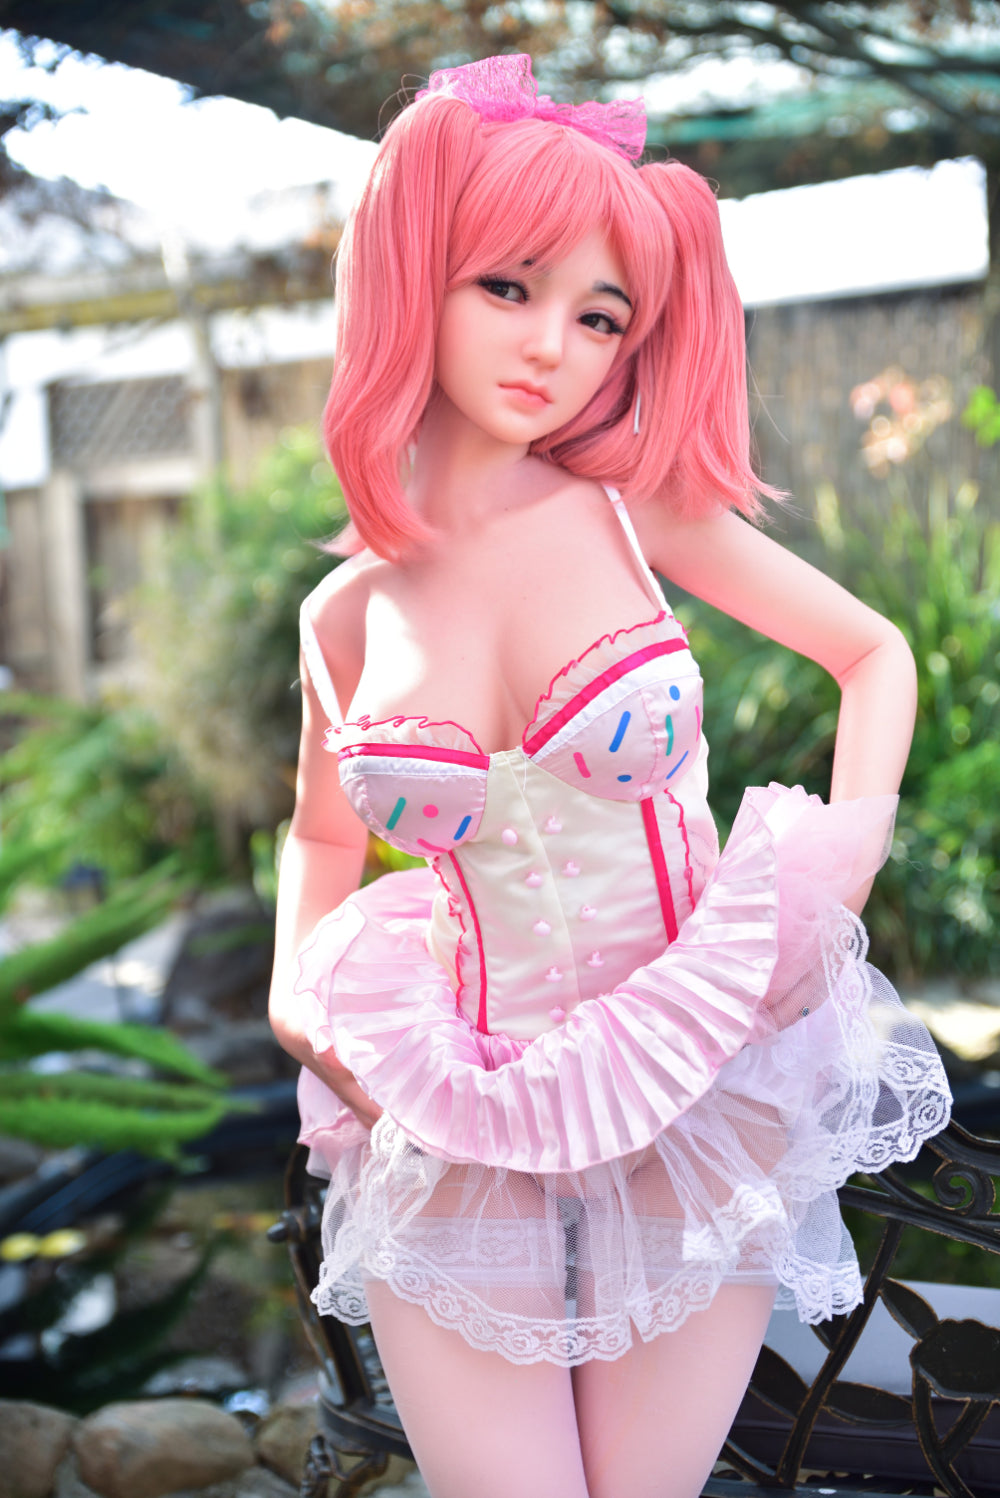 TAYU Doll 148 cm D Silicone - NaiMei | Buy Sex Dolls at DOLLS ACTUALLY